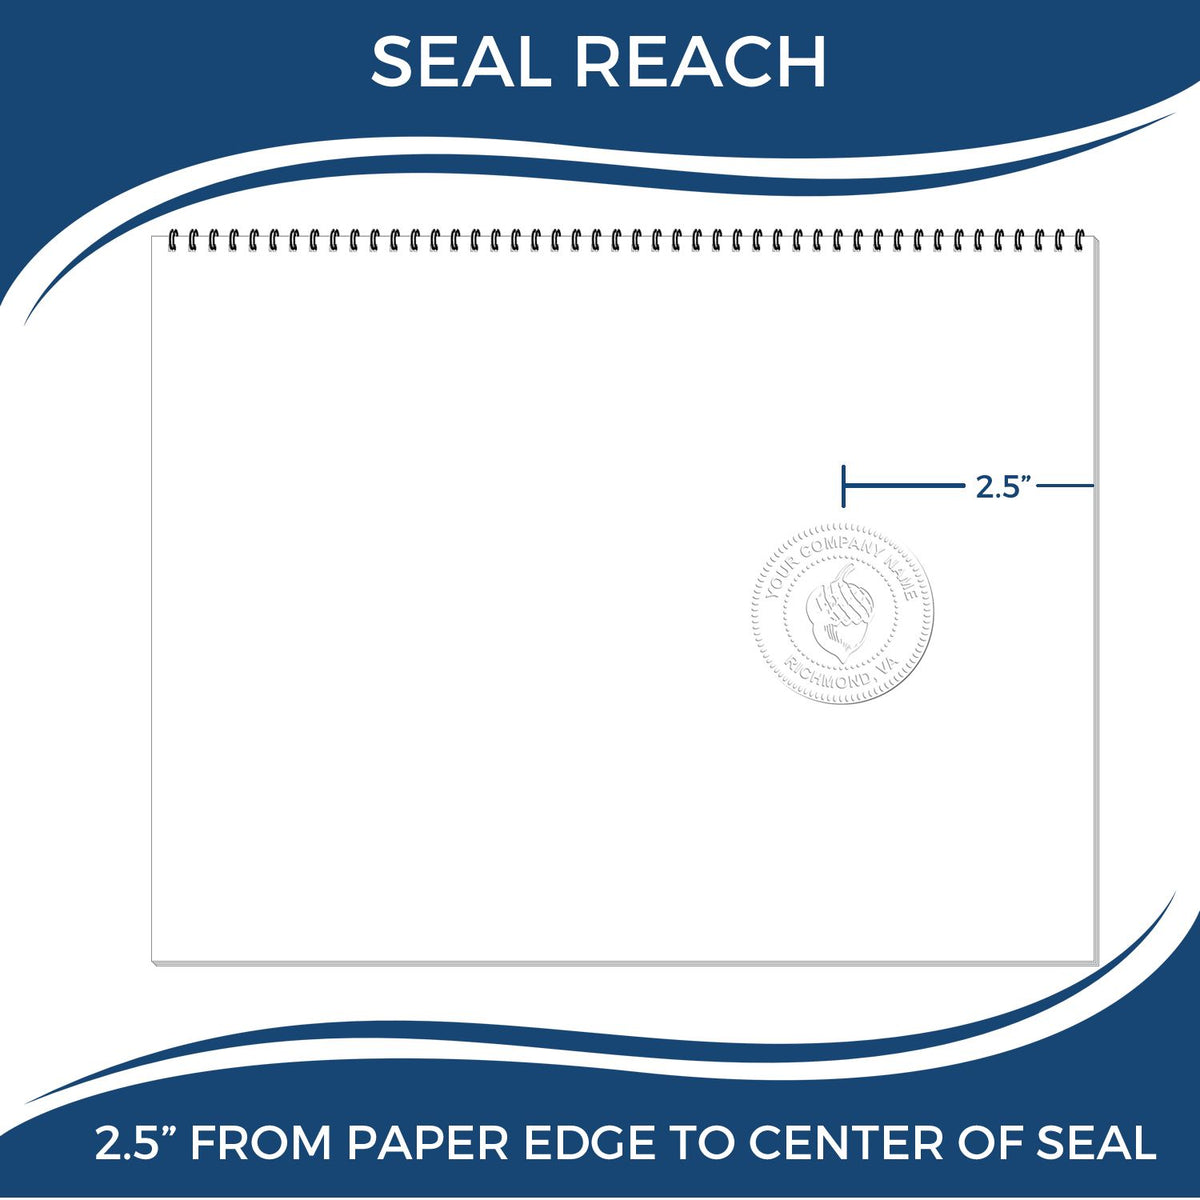 An infographic showing the seal reach which is represented by a ruler and a miniature seal image of the Long Reach Washington PE Seal